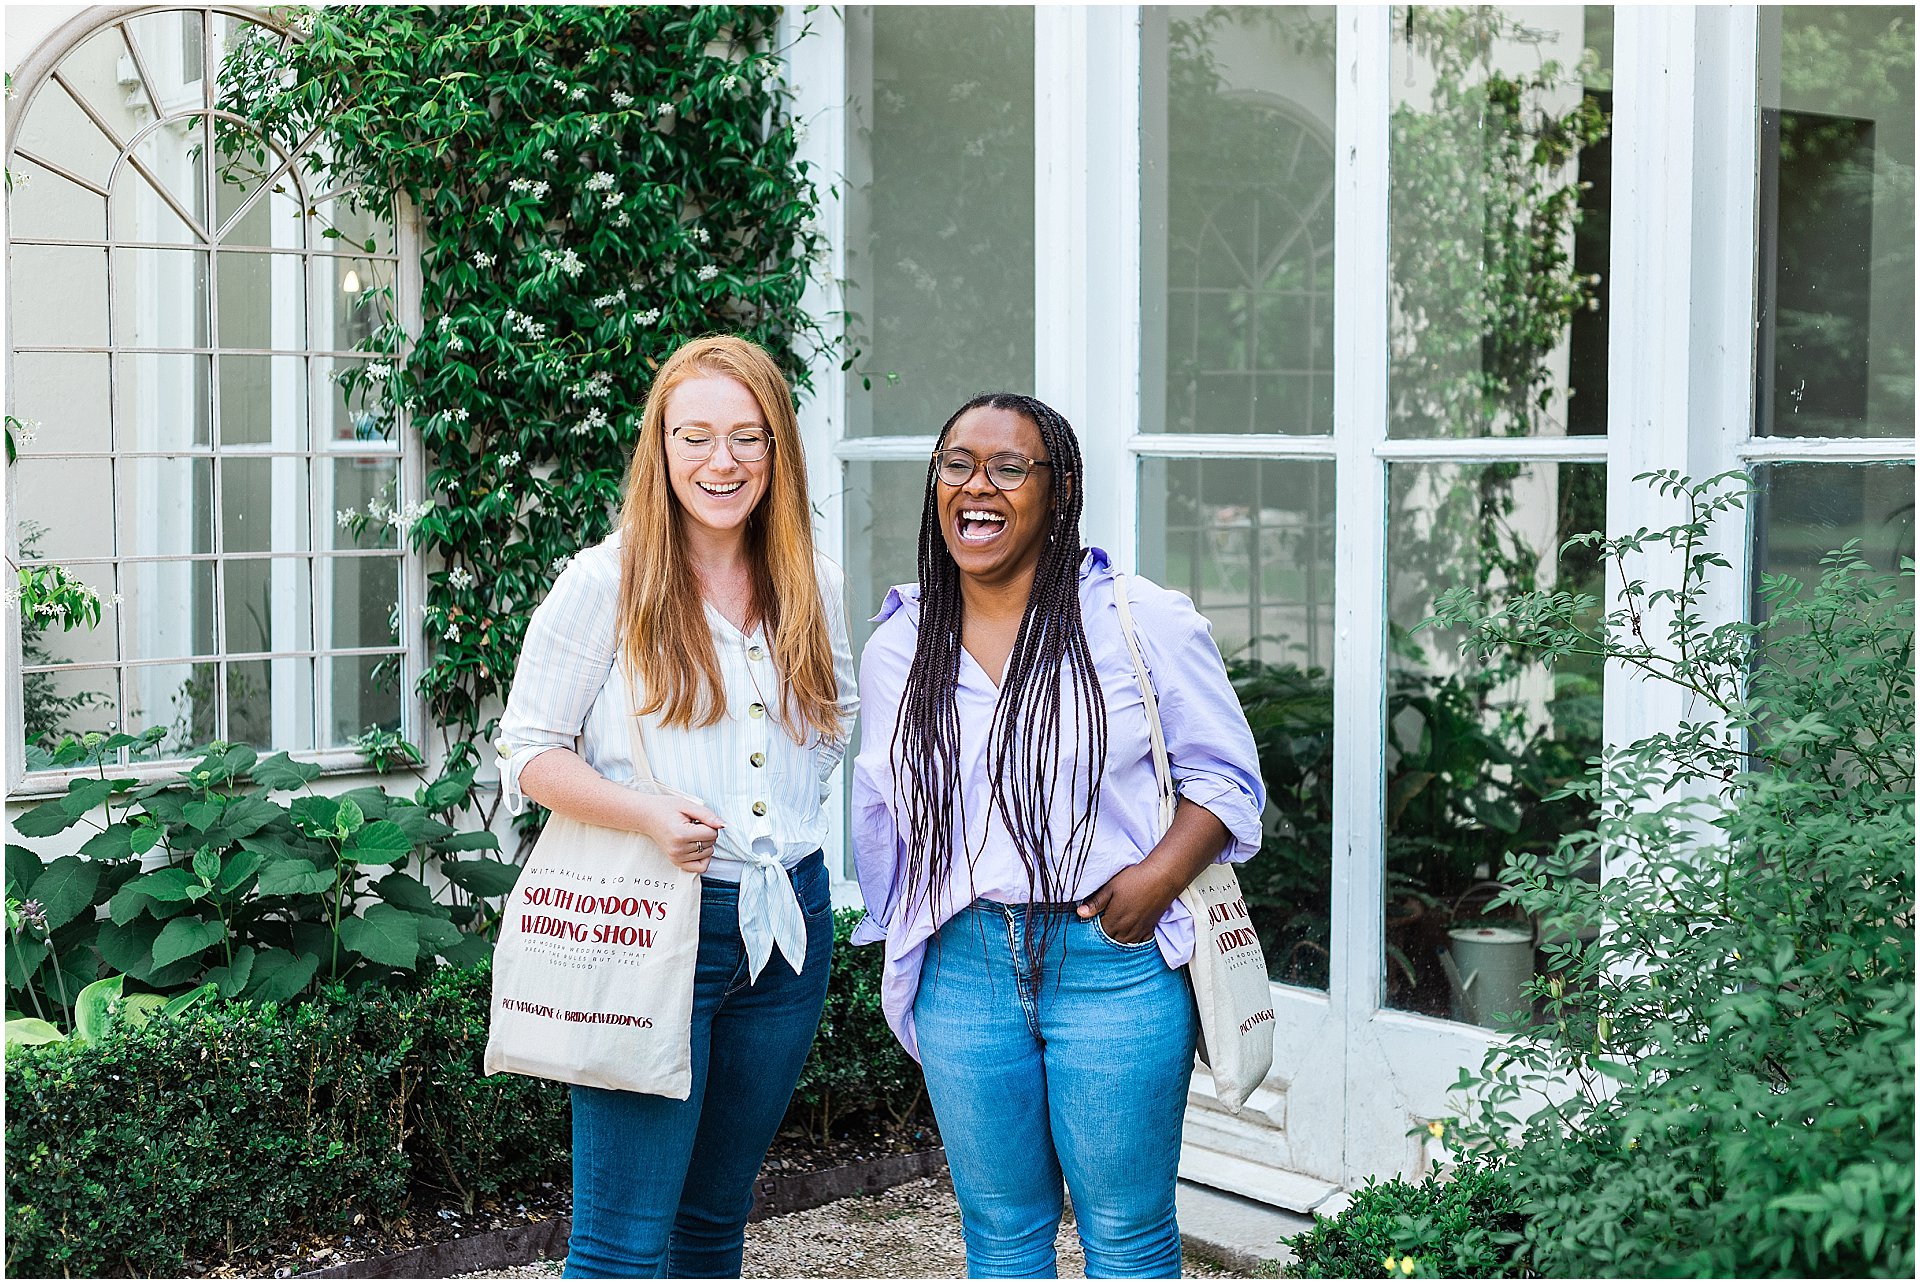 Two joyous women laughing together, the one on the left is white with red hair and glasses wearing a white shirt, and the one of the right is black with braids wearing glasses, a lilac shirt, both are holding tote bags, standing by a white window with green ivy.

Image taken by London brand photographer AKP Branding Stories for the blog post From Snapshots to Storytelling: The Evolution of Brand Photography